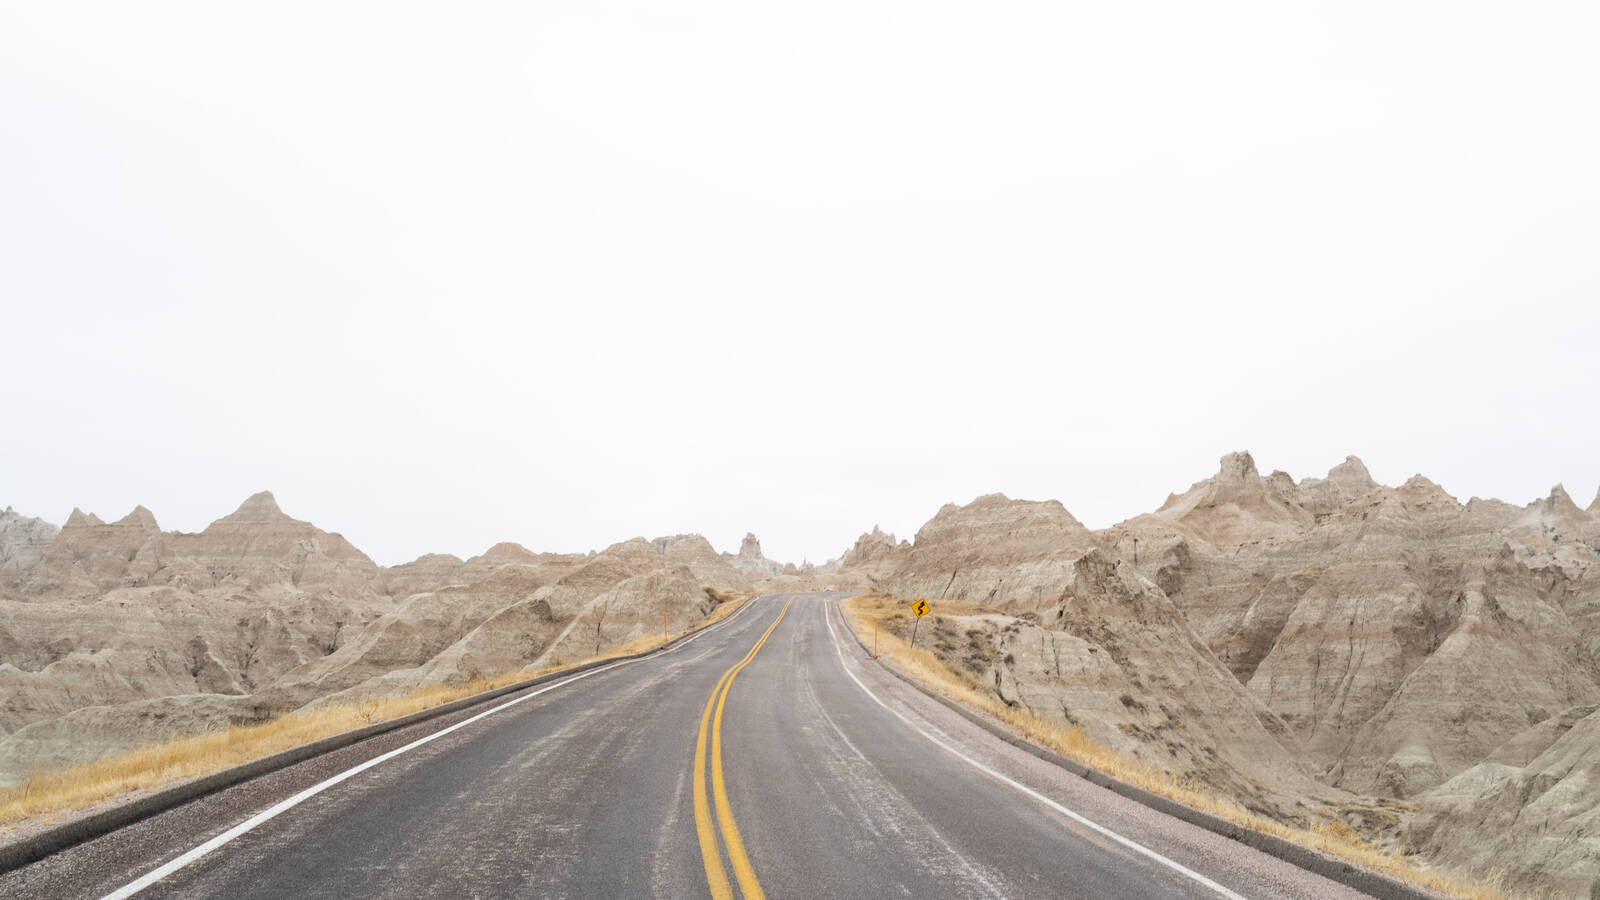 <p>An open road in Badlands National Park. After the storm, those double yellow lines would be nearly impossible to see, leading the brothers to hold open the car door at times.</p>